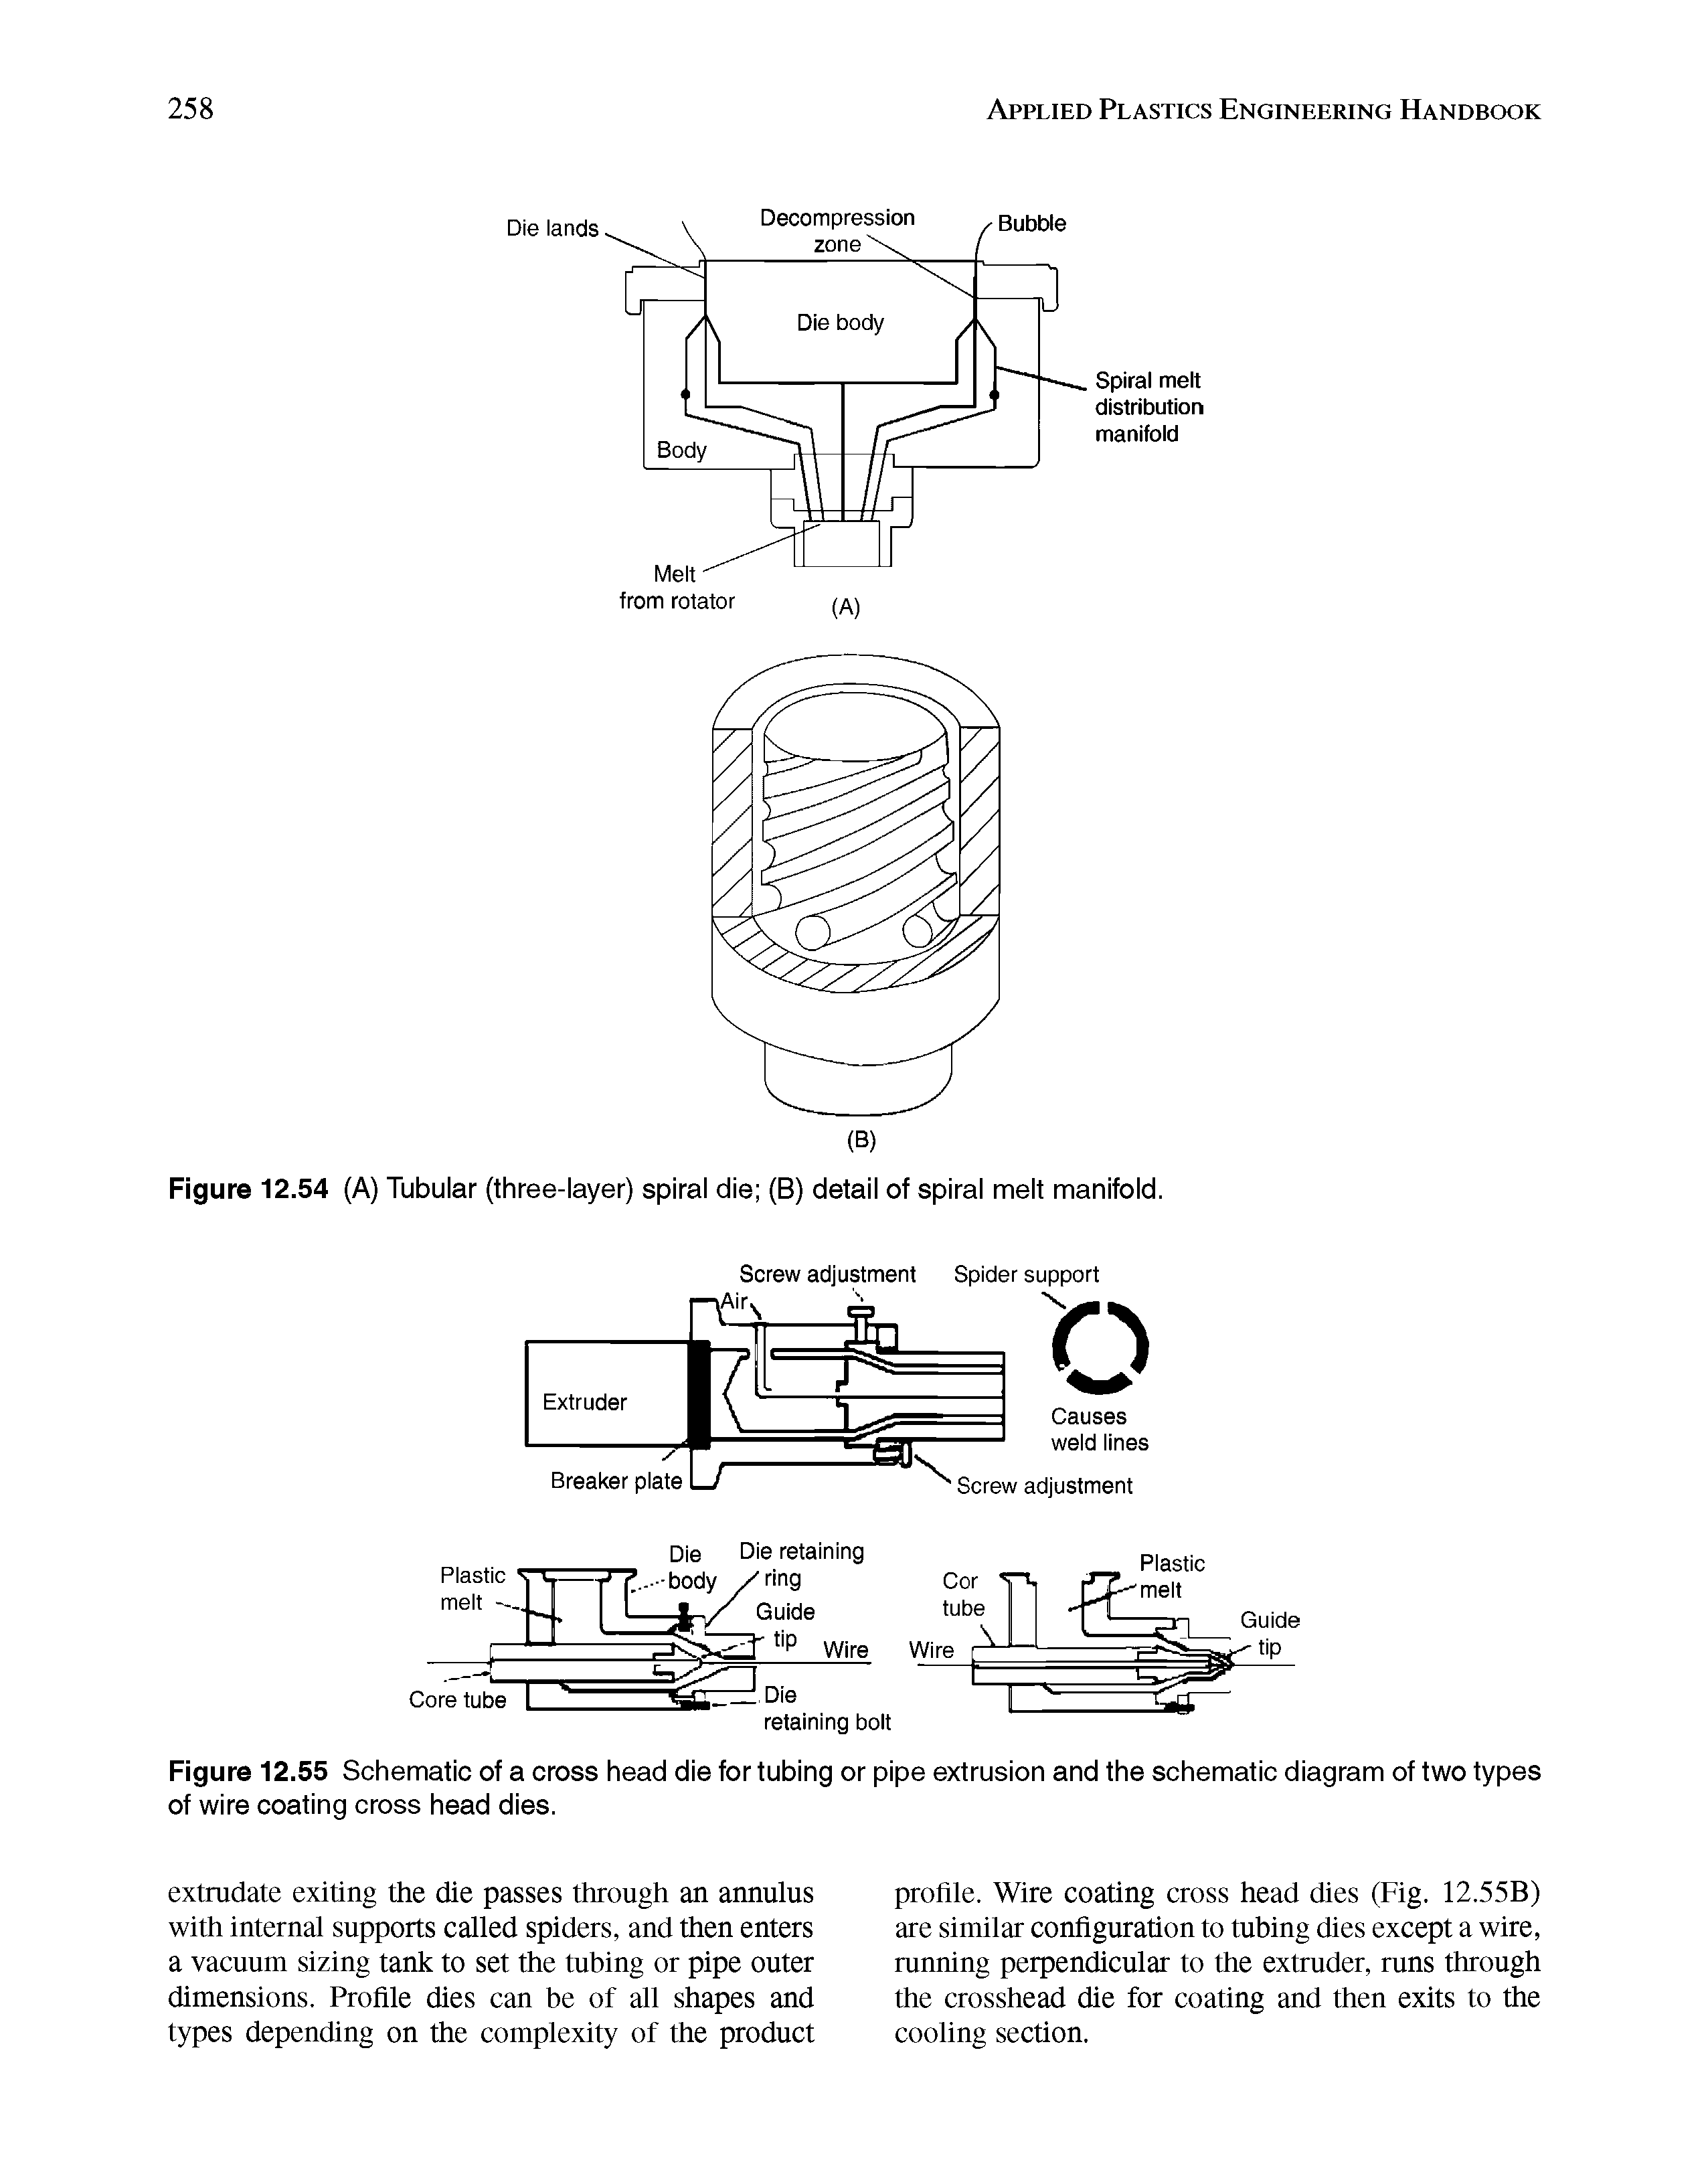 Figure 12.55 Schematic of a cross head die for tubing or pipe extrusion and the schematic diagram of two types of wire coating cross head dies.